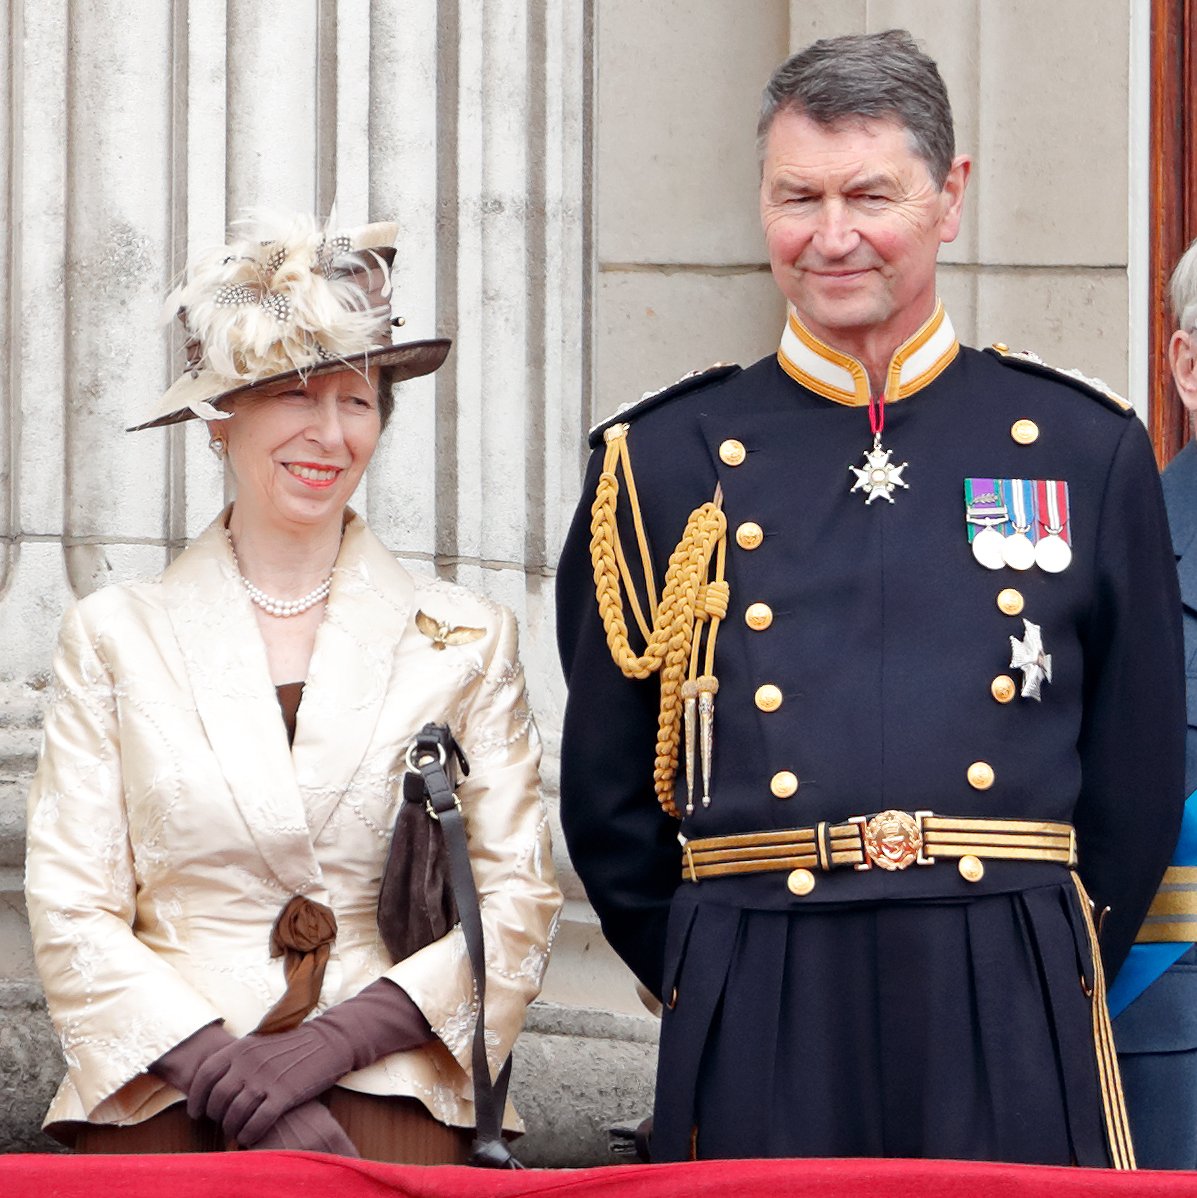 Princess Anne, Princess Royal and Vice Admiral Sir Tim Laurence watch a flypast to mark the centenary of the Royal Air Force from the balcony of Buckingham Palace on July 10, 2018 in London, England | Source: Getty Images